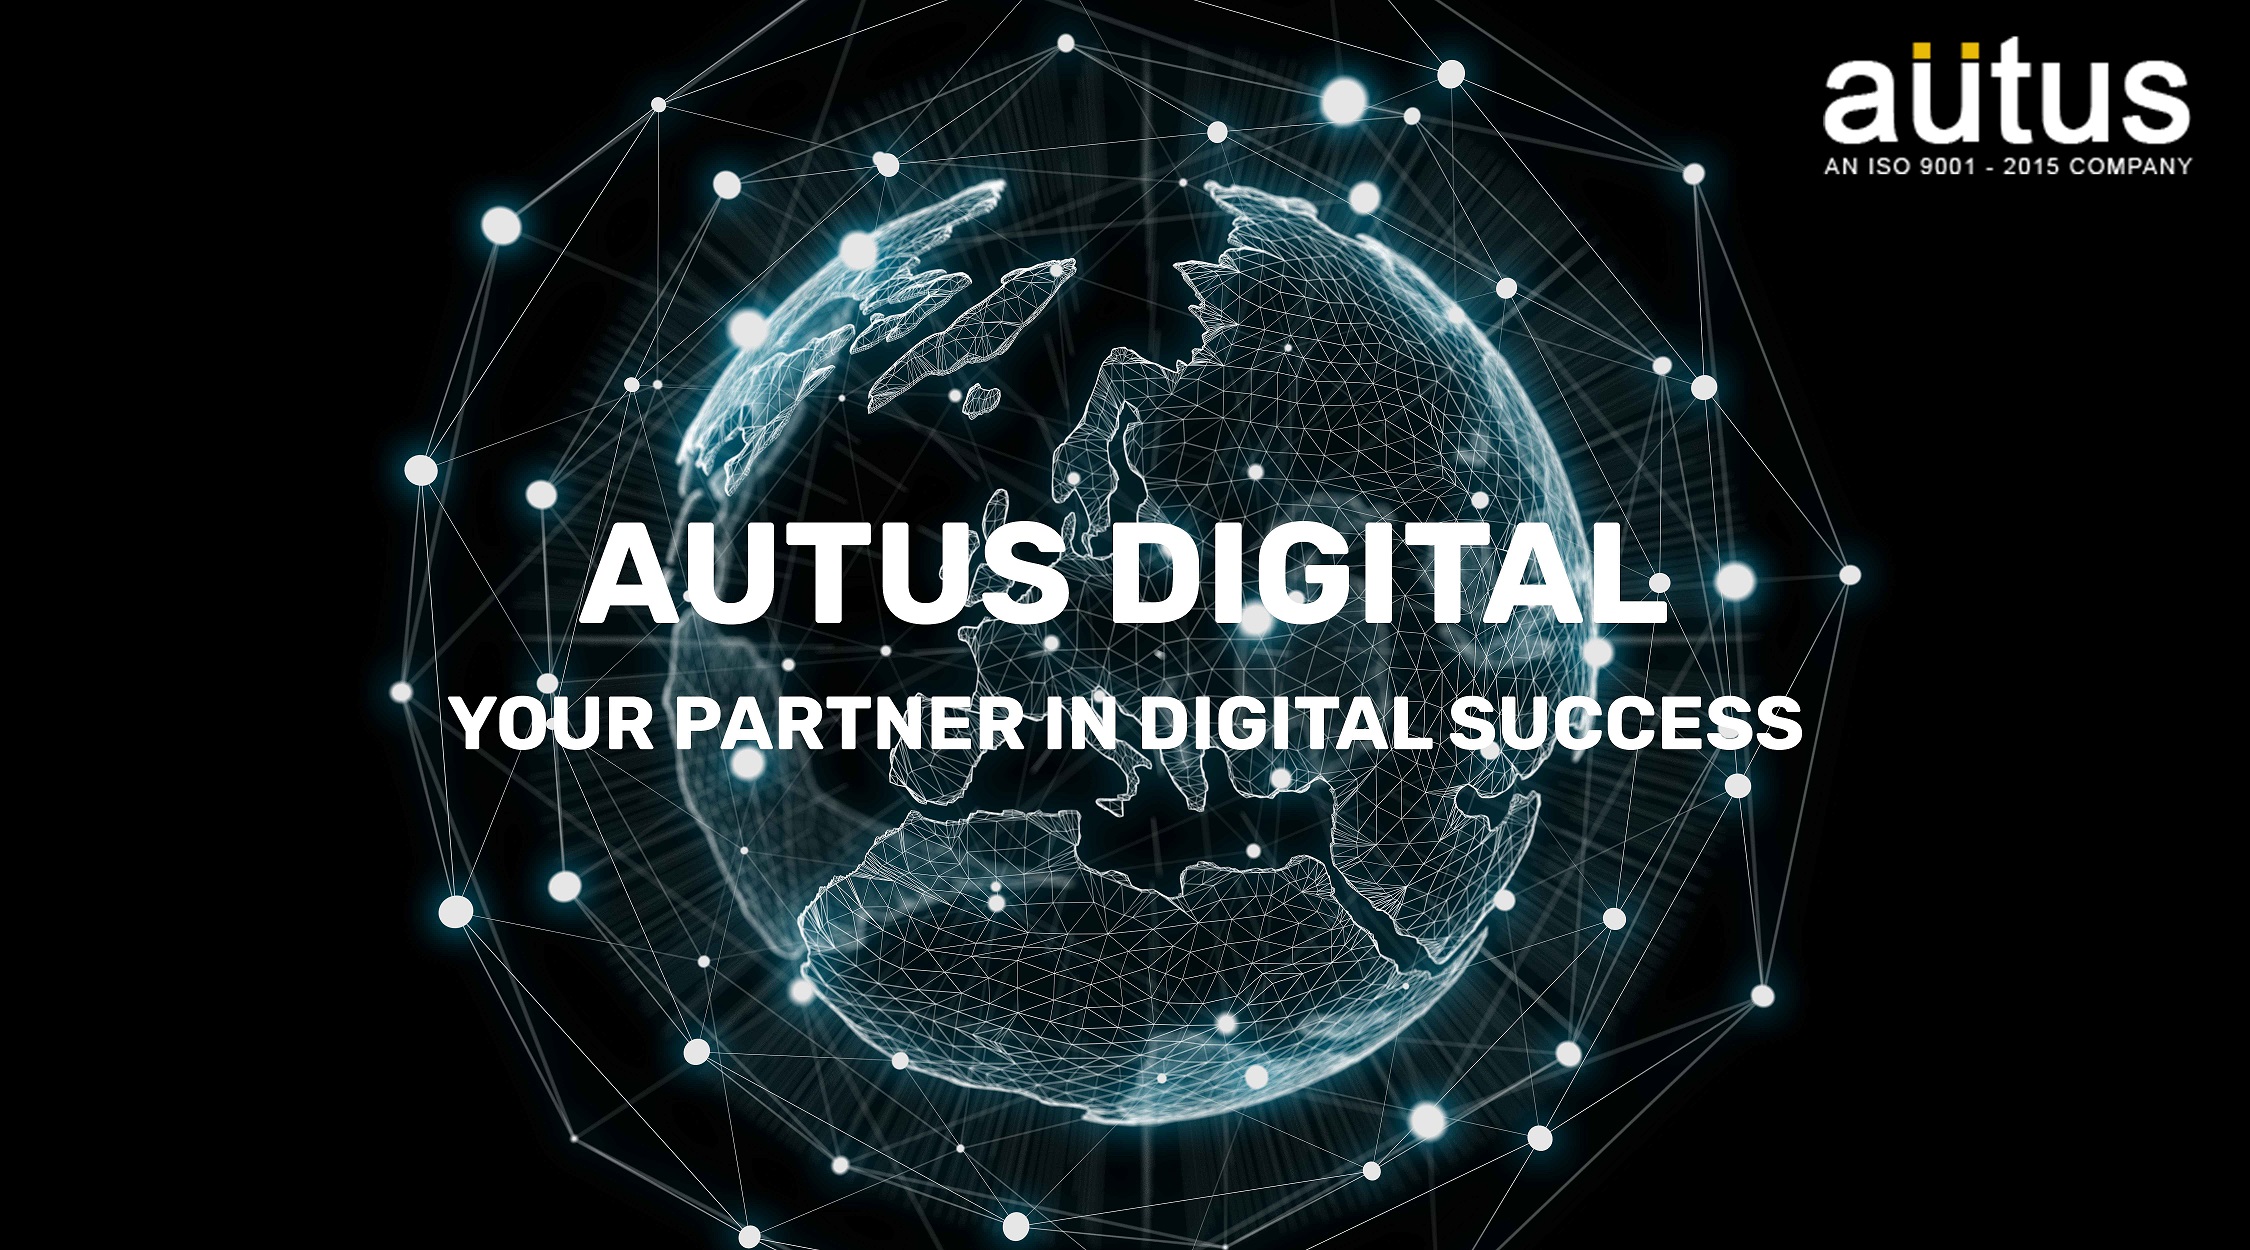 Autus Digital Agency offers affordable yet reliable digital marketing services in India, US, UK & Canada